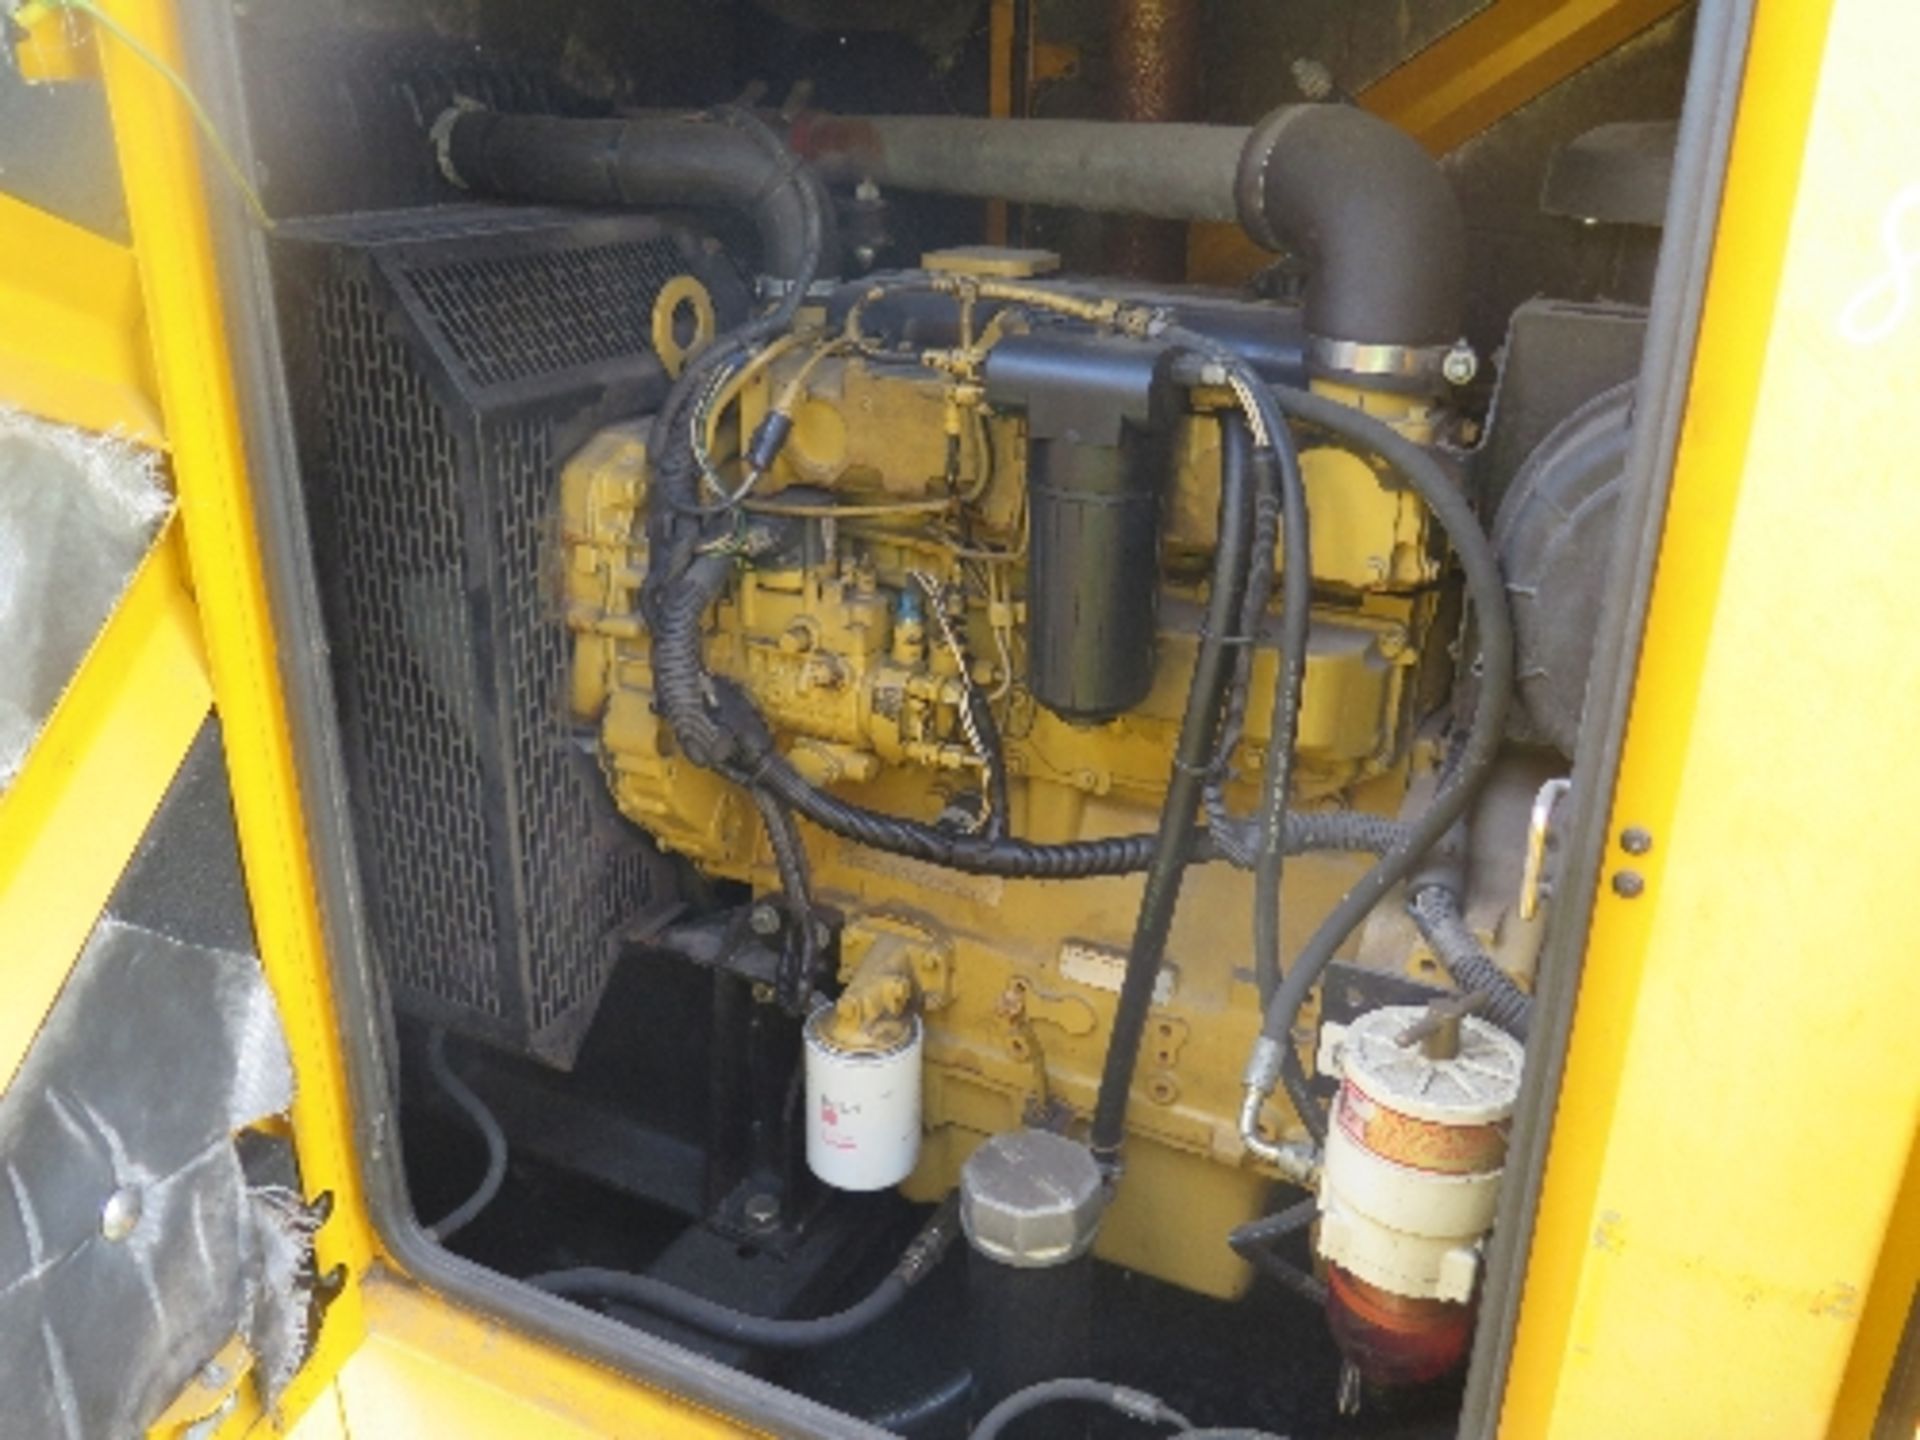 Caterpillar XQE80 generator 14217 hrs 5003860
PERKINS - TURNS OVER - CONTROL PANEL MISSING - MAIN - Image 3 of 6